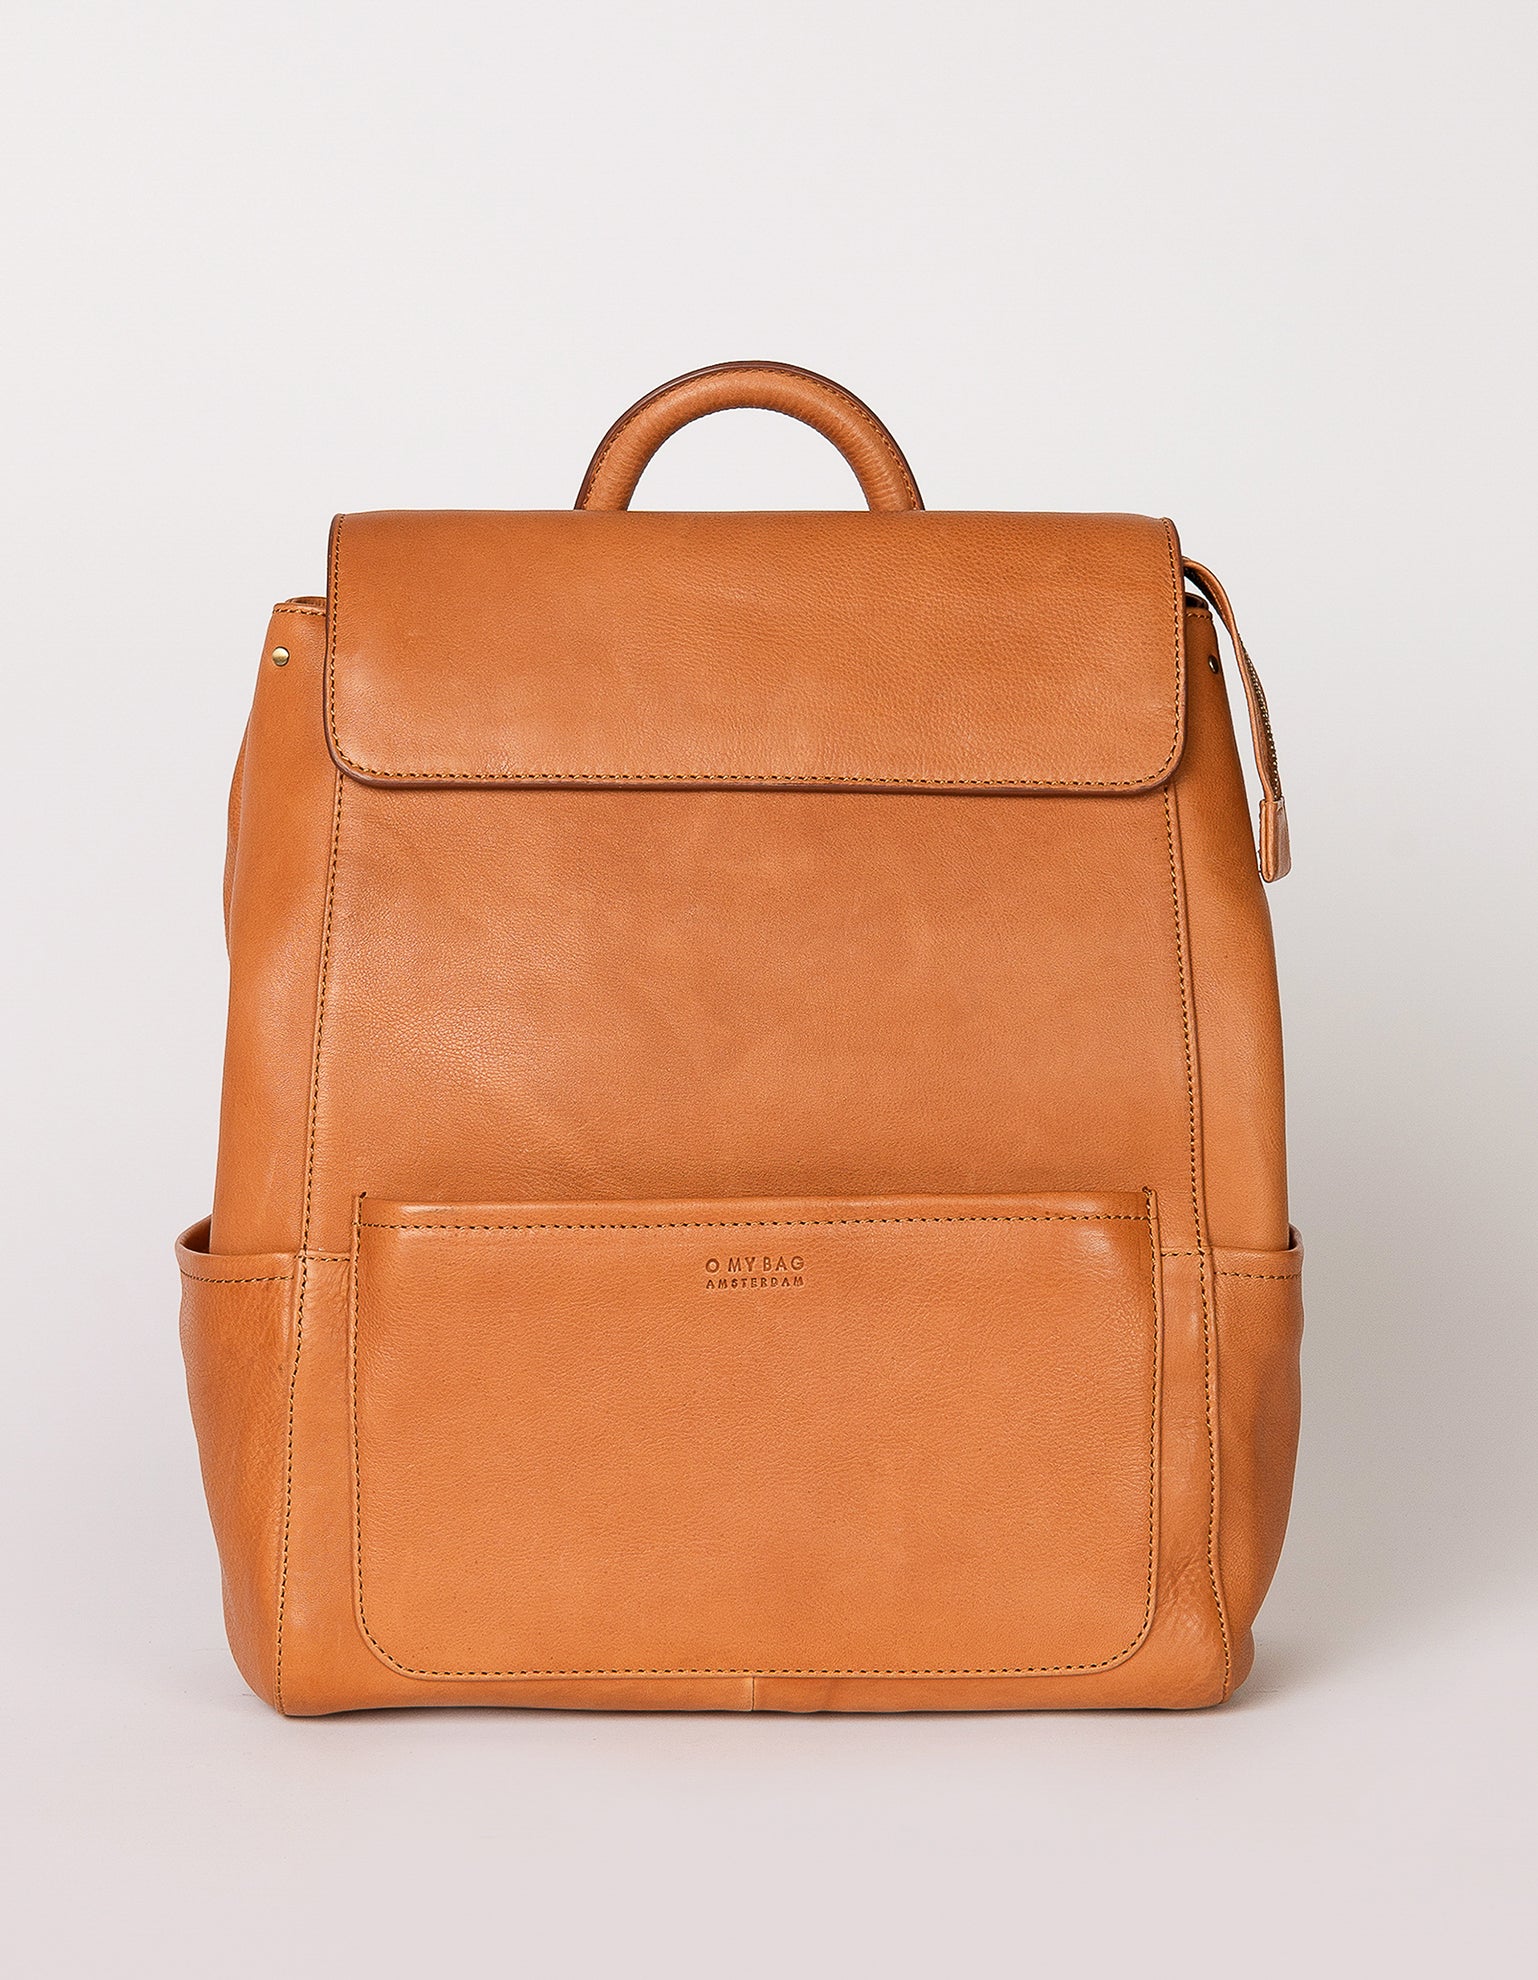 Jean Backpack in Wild Oak Soft Grain. Leather - Front product image